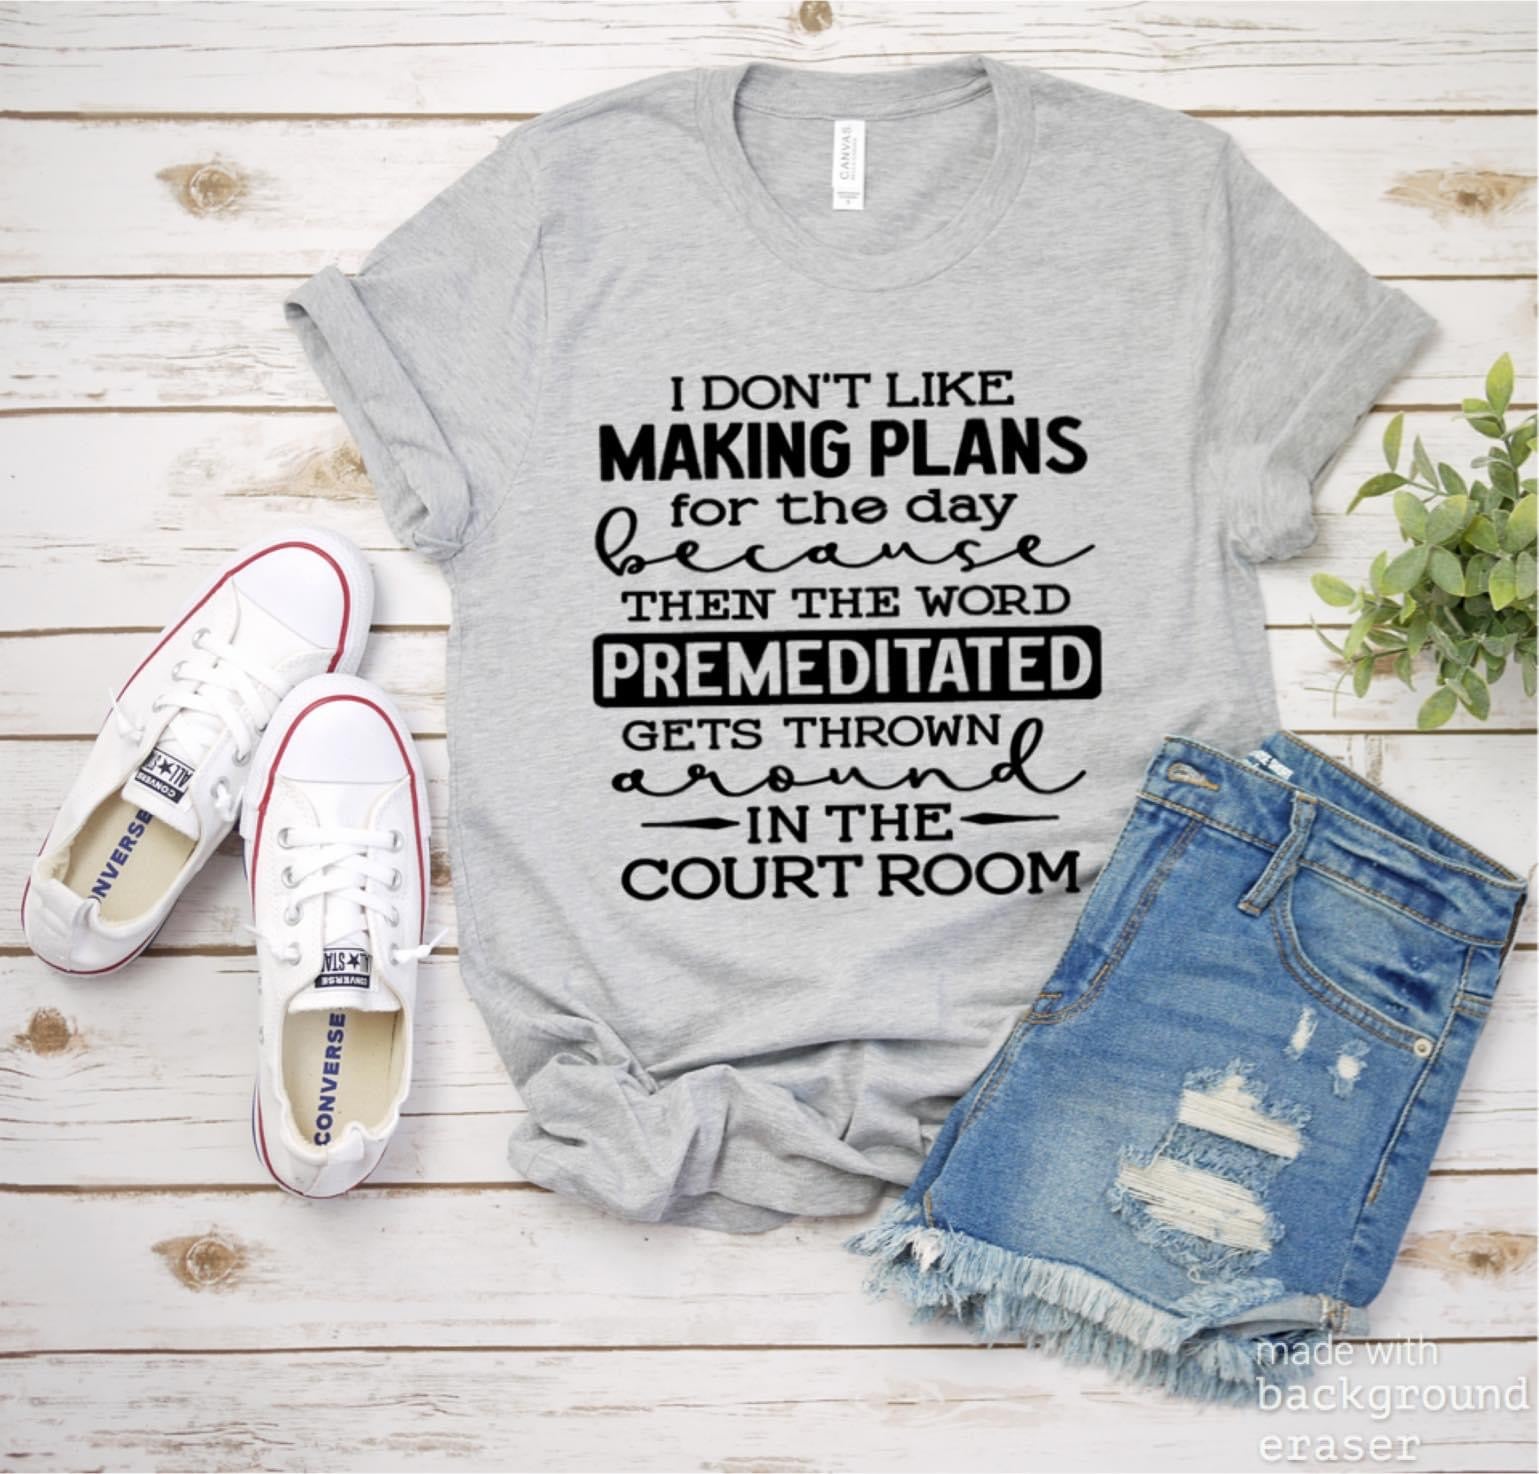 I don't like making plans tee